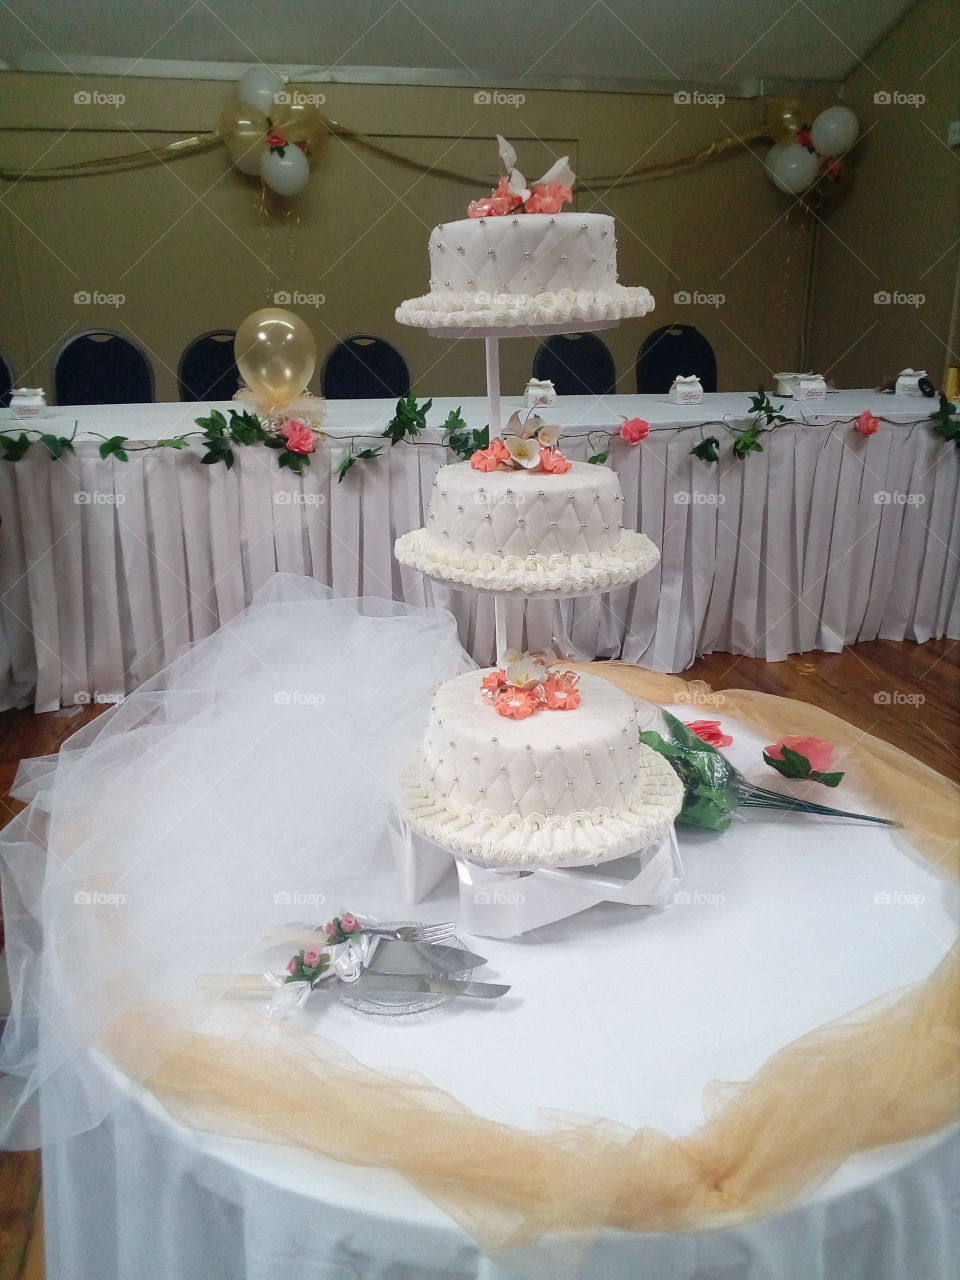 A wedding cake to remember, with a touch of elegance.